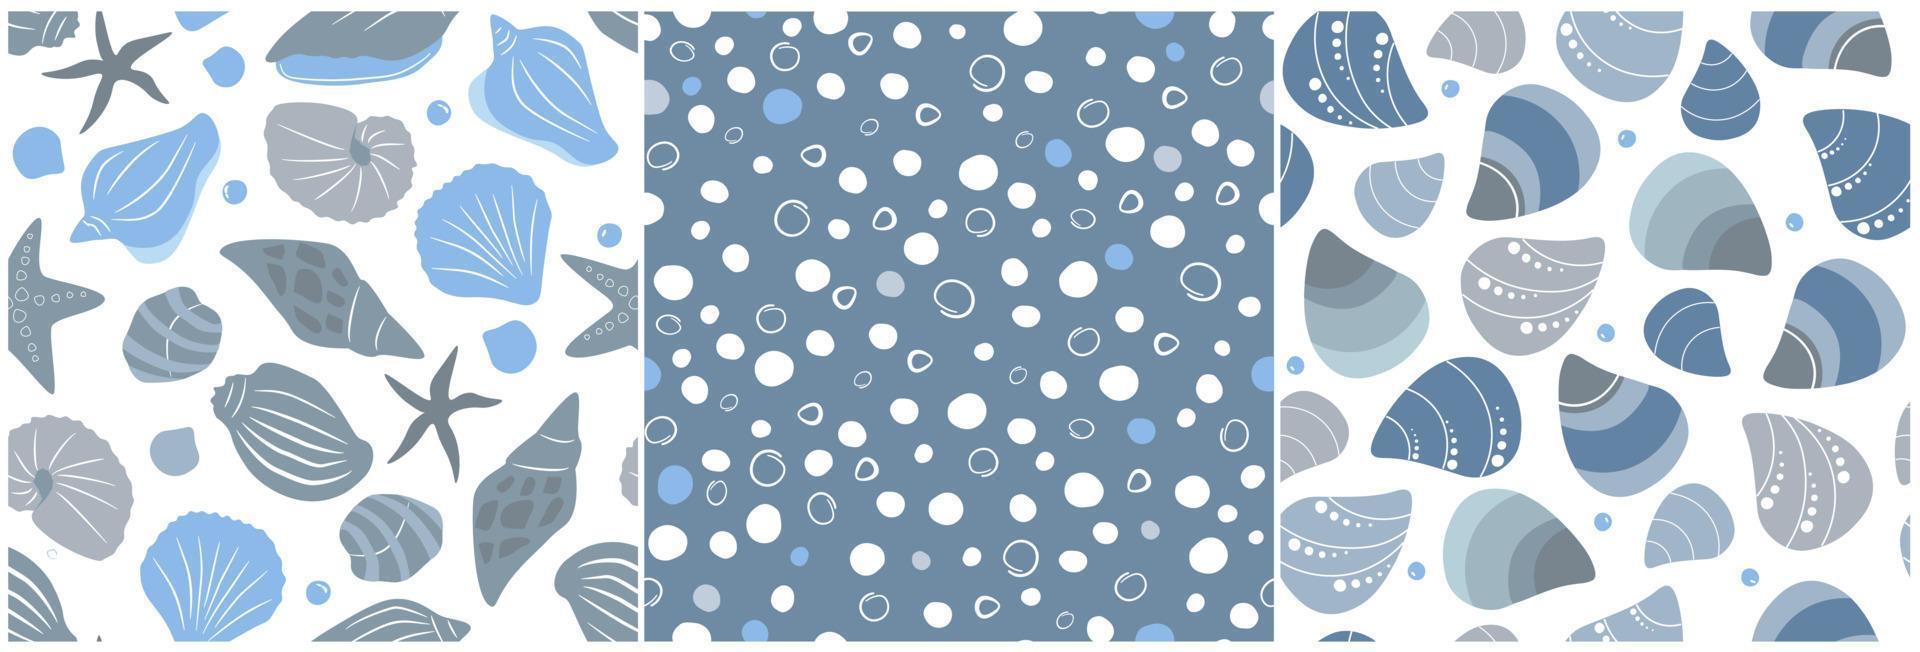 The set is a seamless pattern with marine ocean inhabitants, a collection of shells, water with air bubbles. Sea abstract print. Vector graphics.